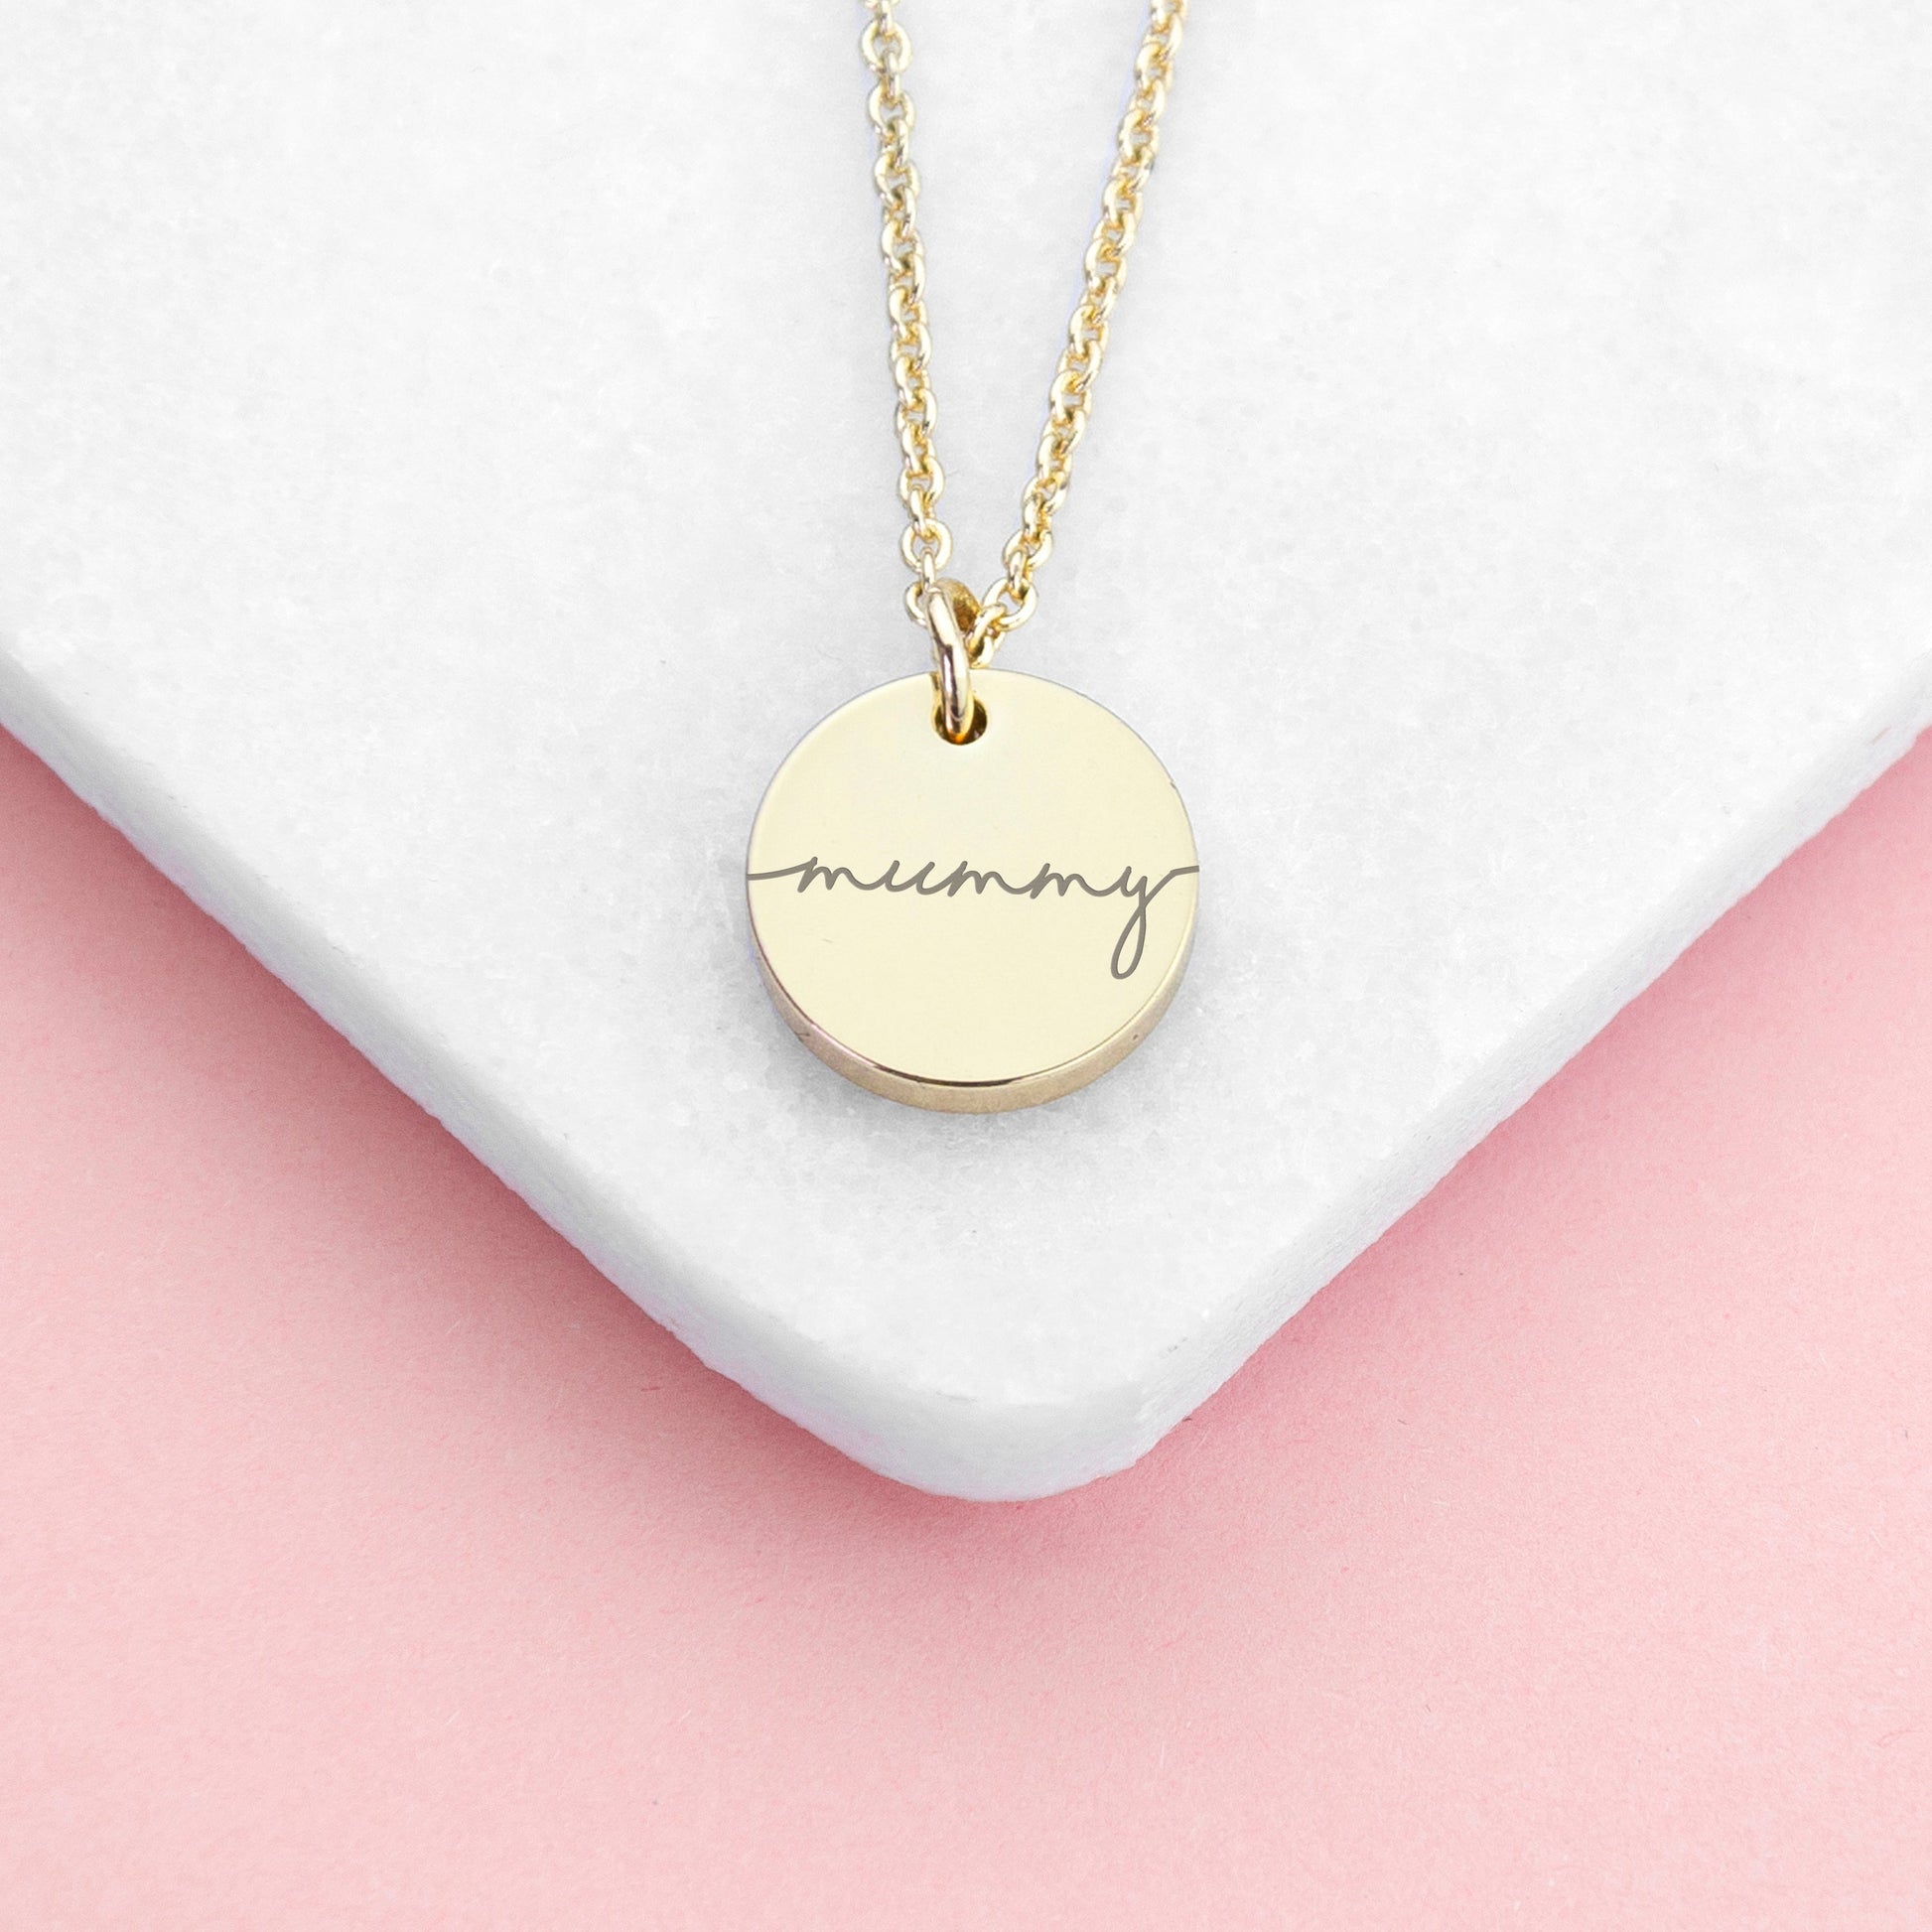 Personalized Necklaces - Personalized Disc Necklace 